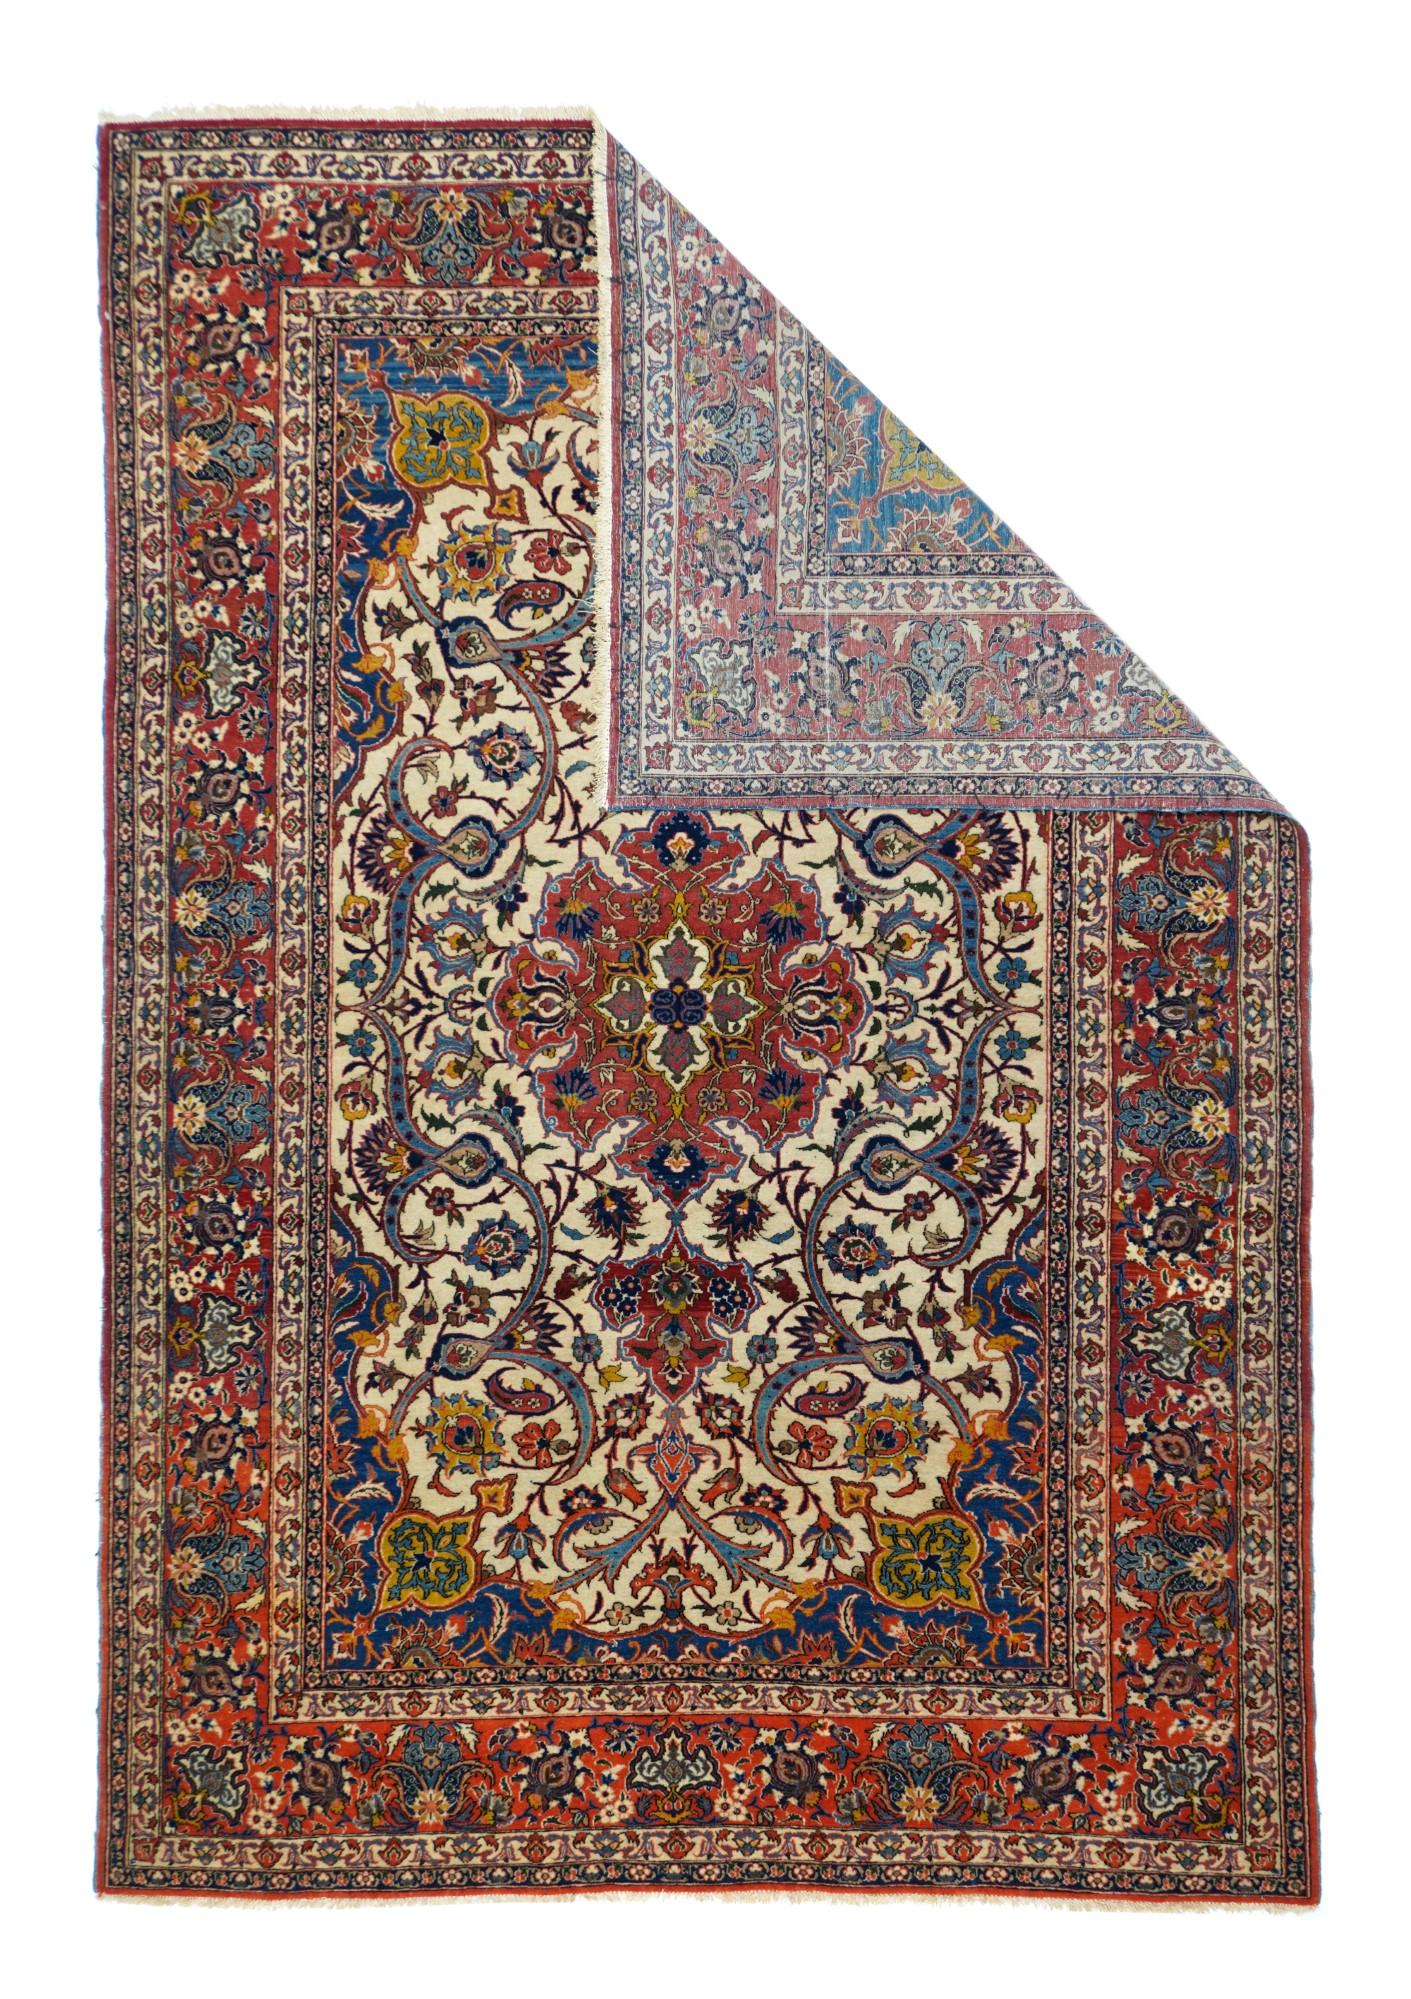 In the iconic Isfahan style, with a very fine weave of asymmetric knots on a cotton foundation, this attractive, good condition urban scatter from Central Persia shows the characteristic old ivory field with a red flaming octofoil almost round